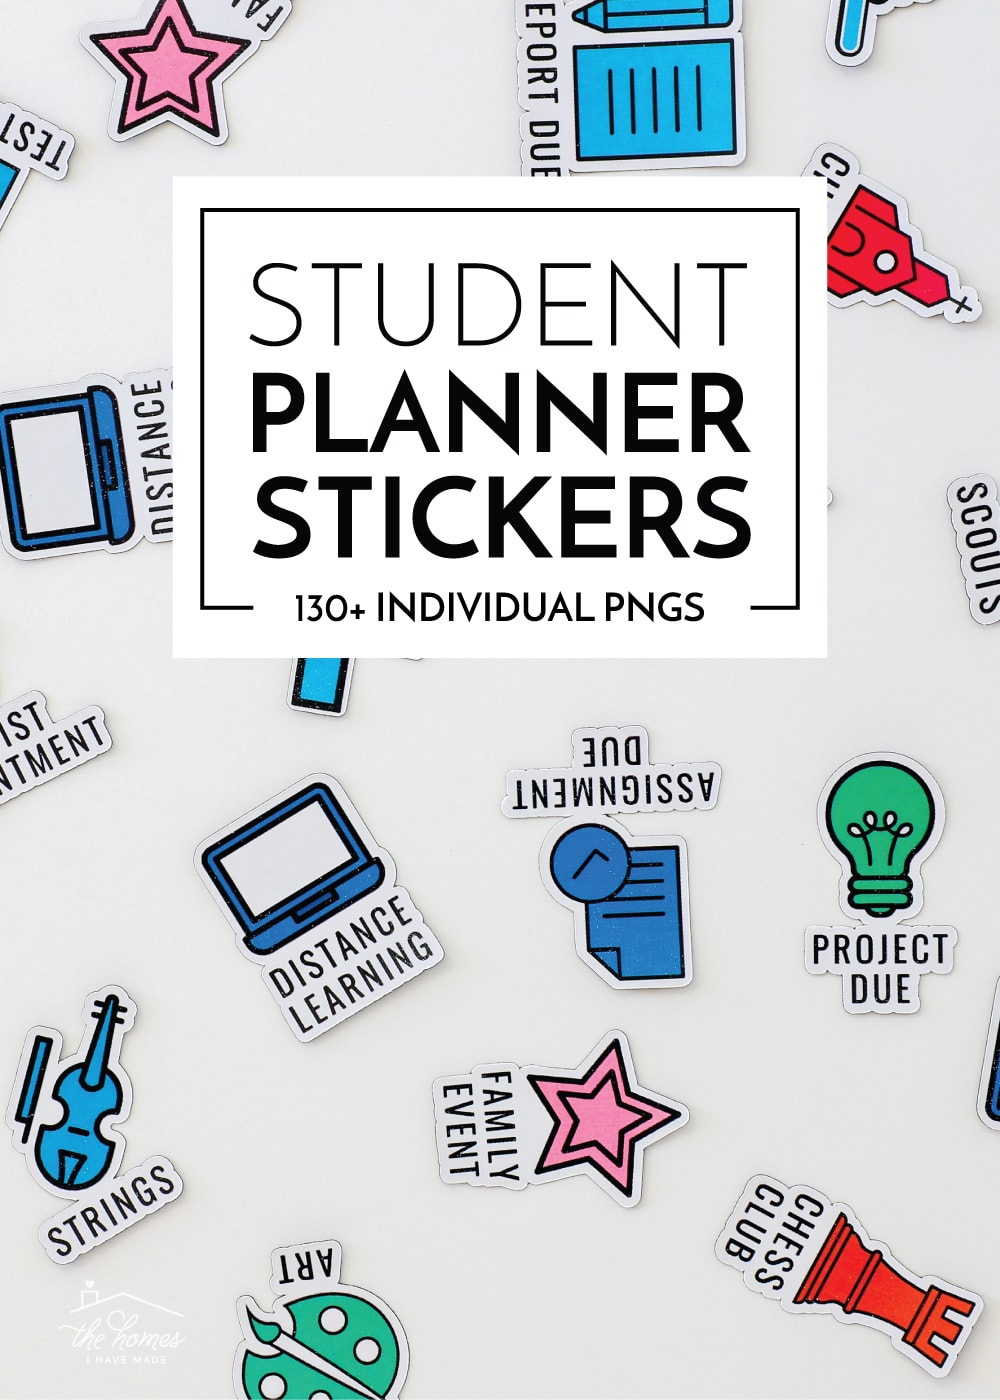 Student Planner Stickers (And Clever Ideas for Using Them!) - The